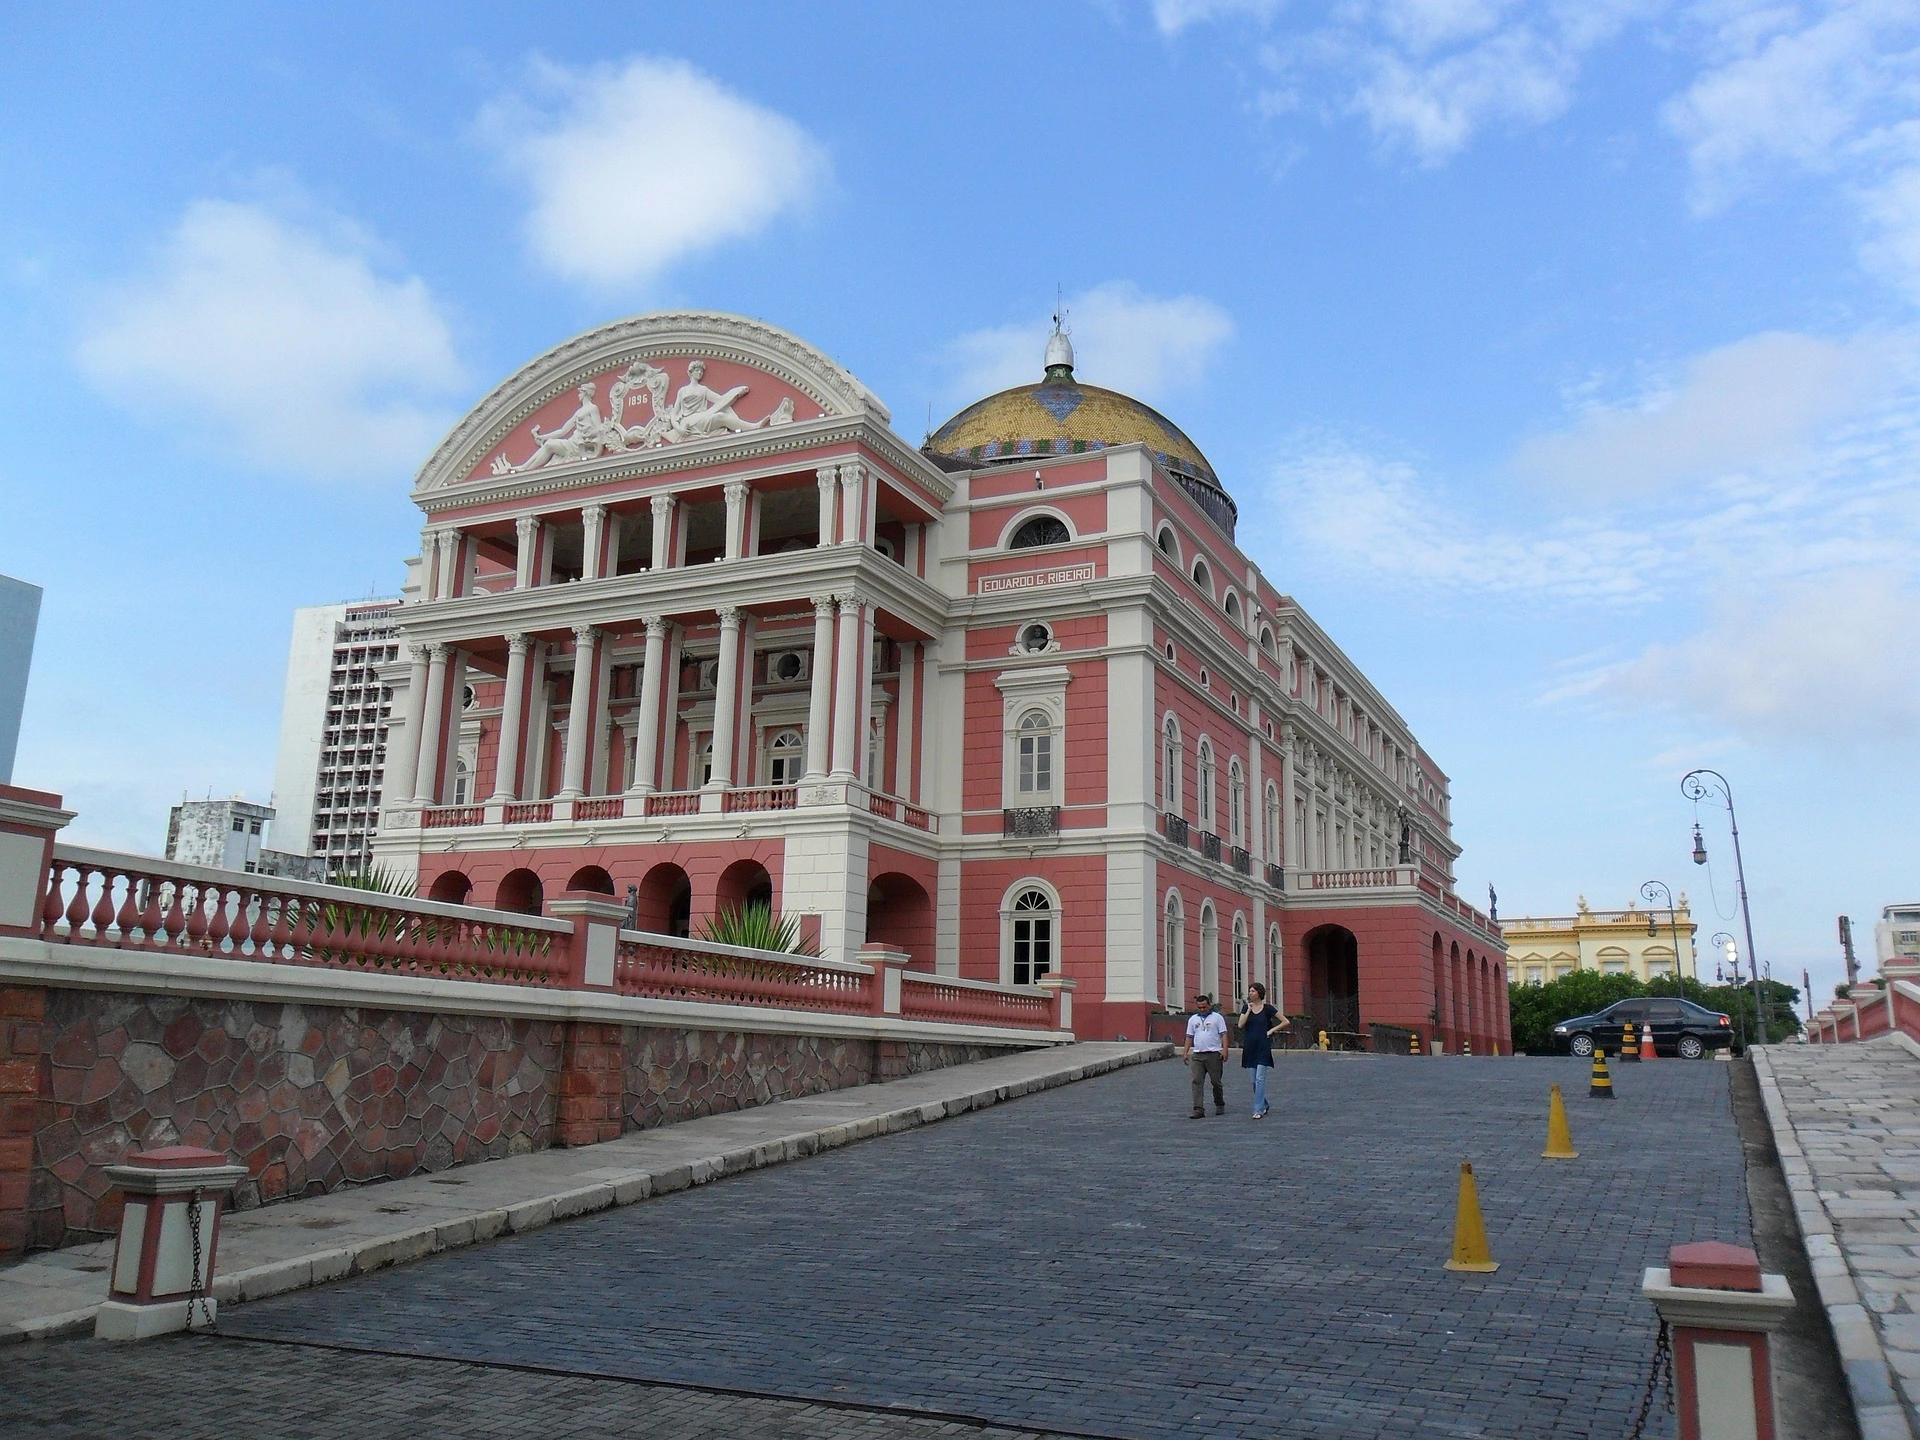 History in Brazil: Discovering the Cultural Cities